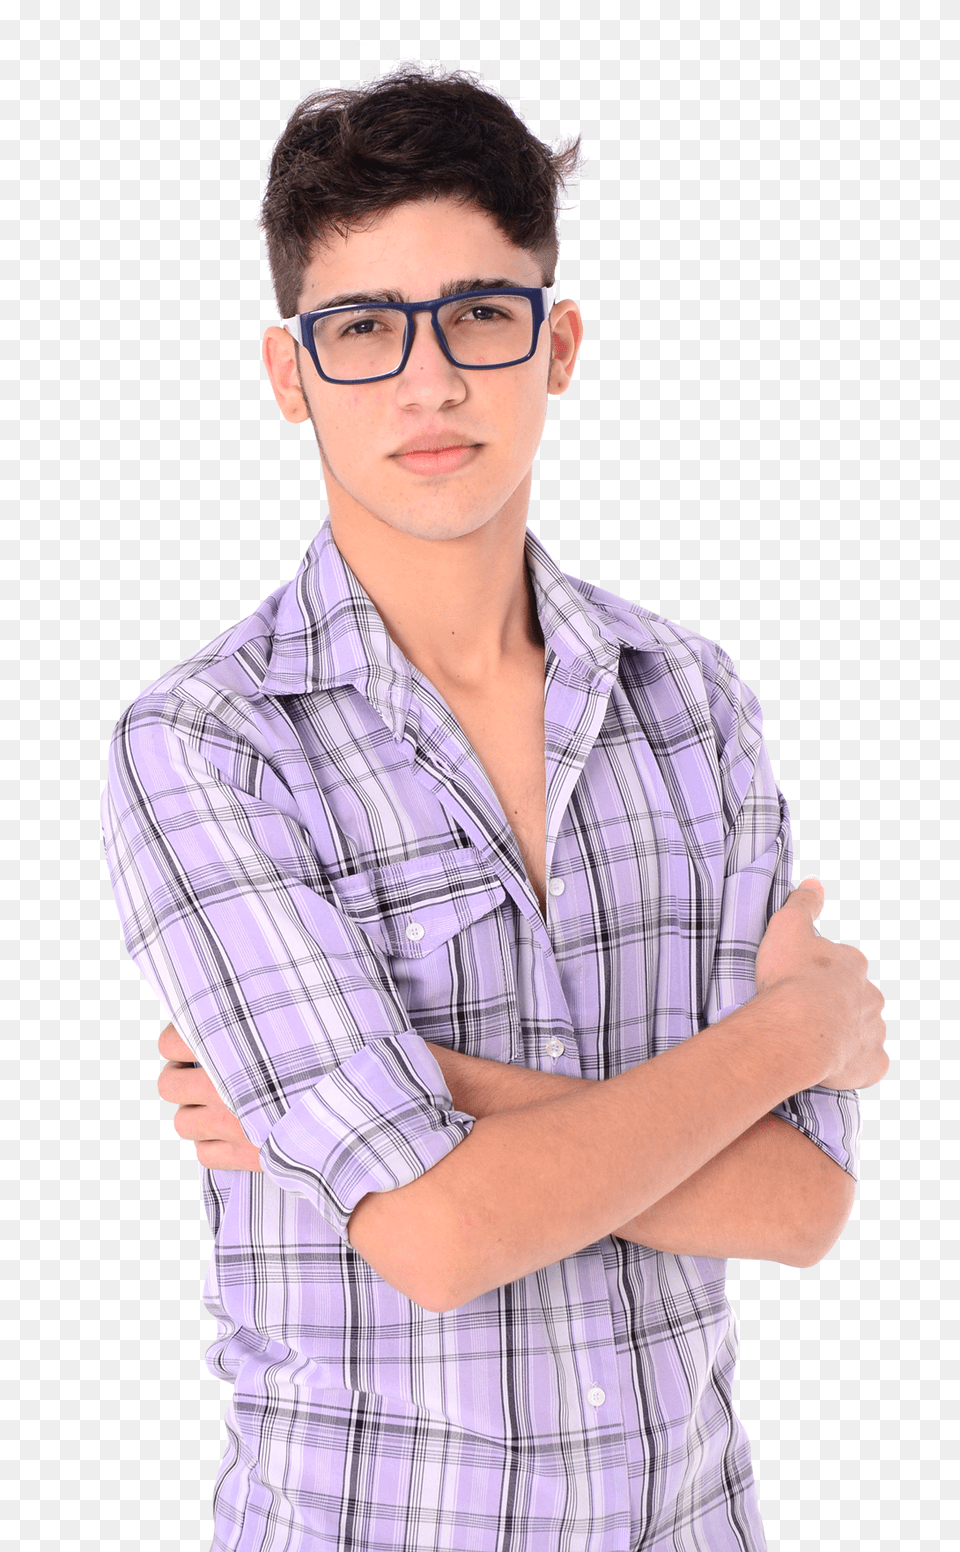 Pngpix Com Young Man Wearing A Casual Shirt Image, Clothing, Face, Portrait, Head Free Png Download